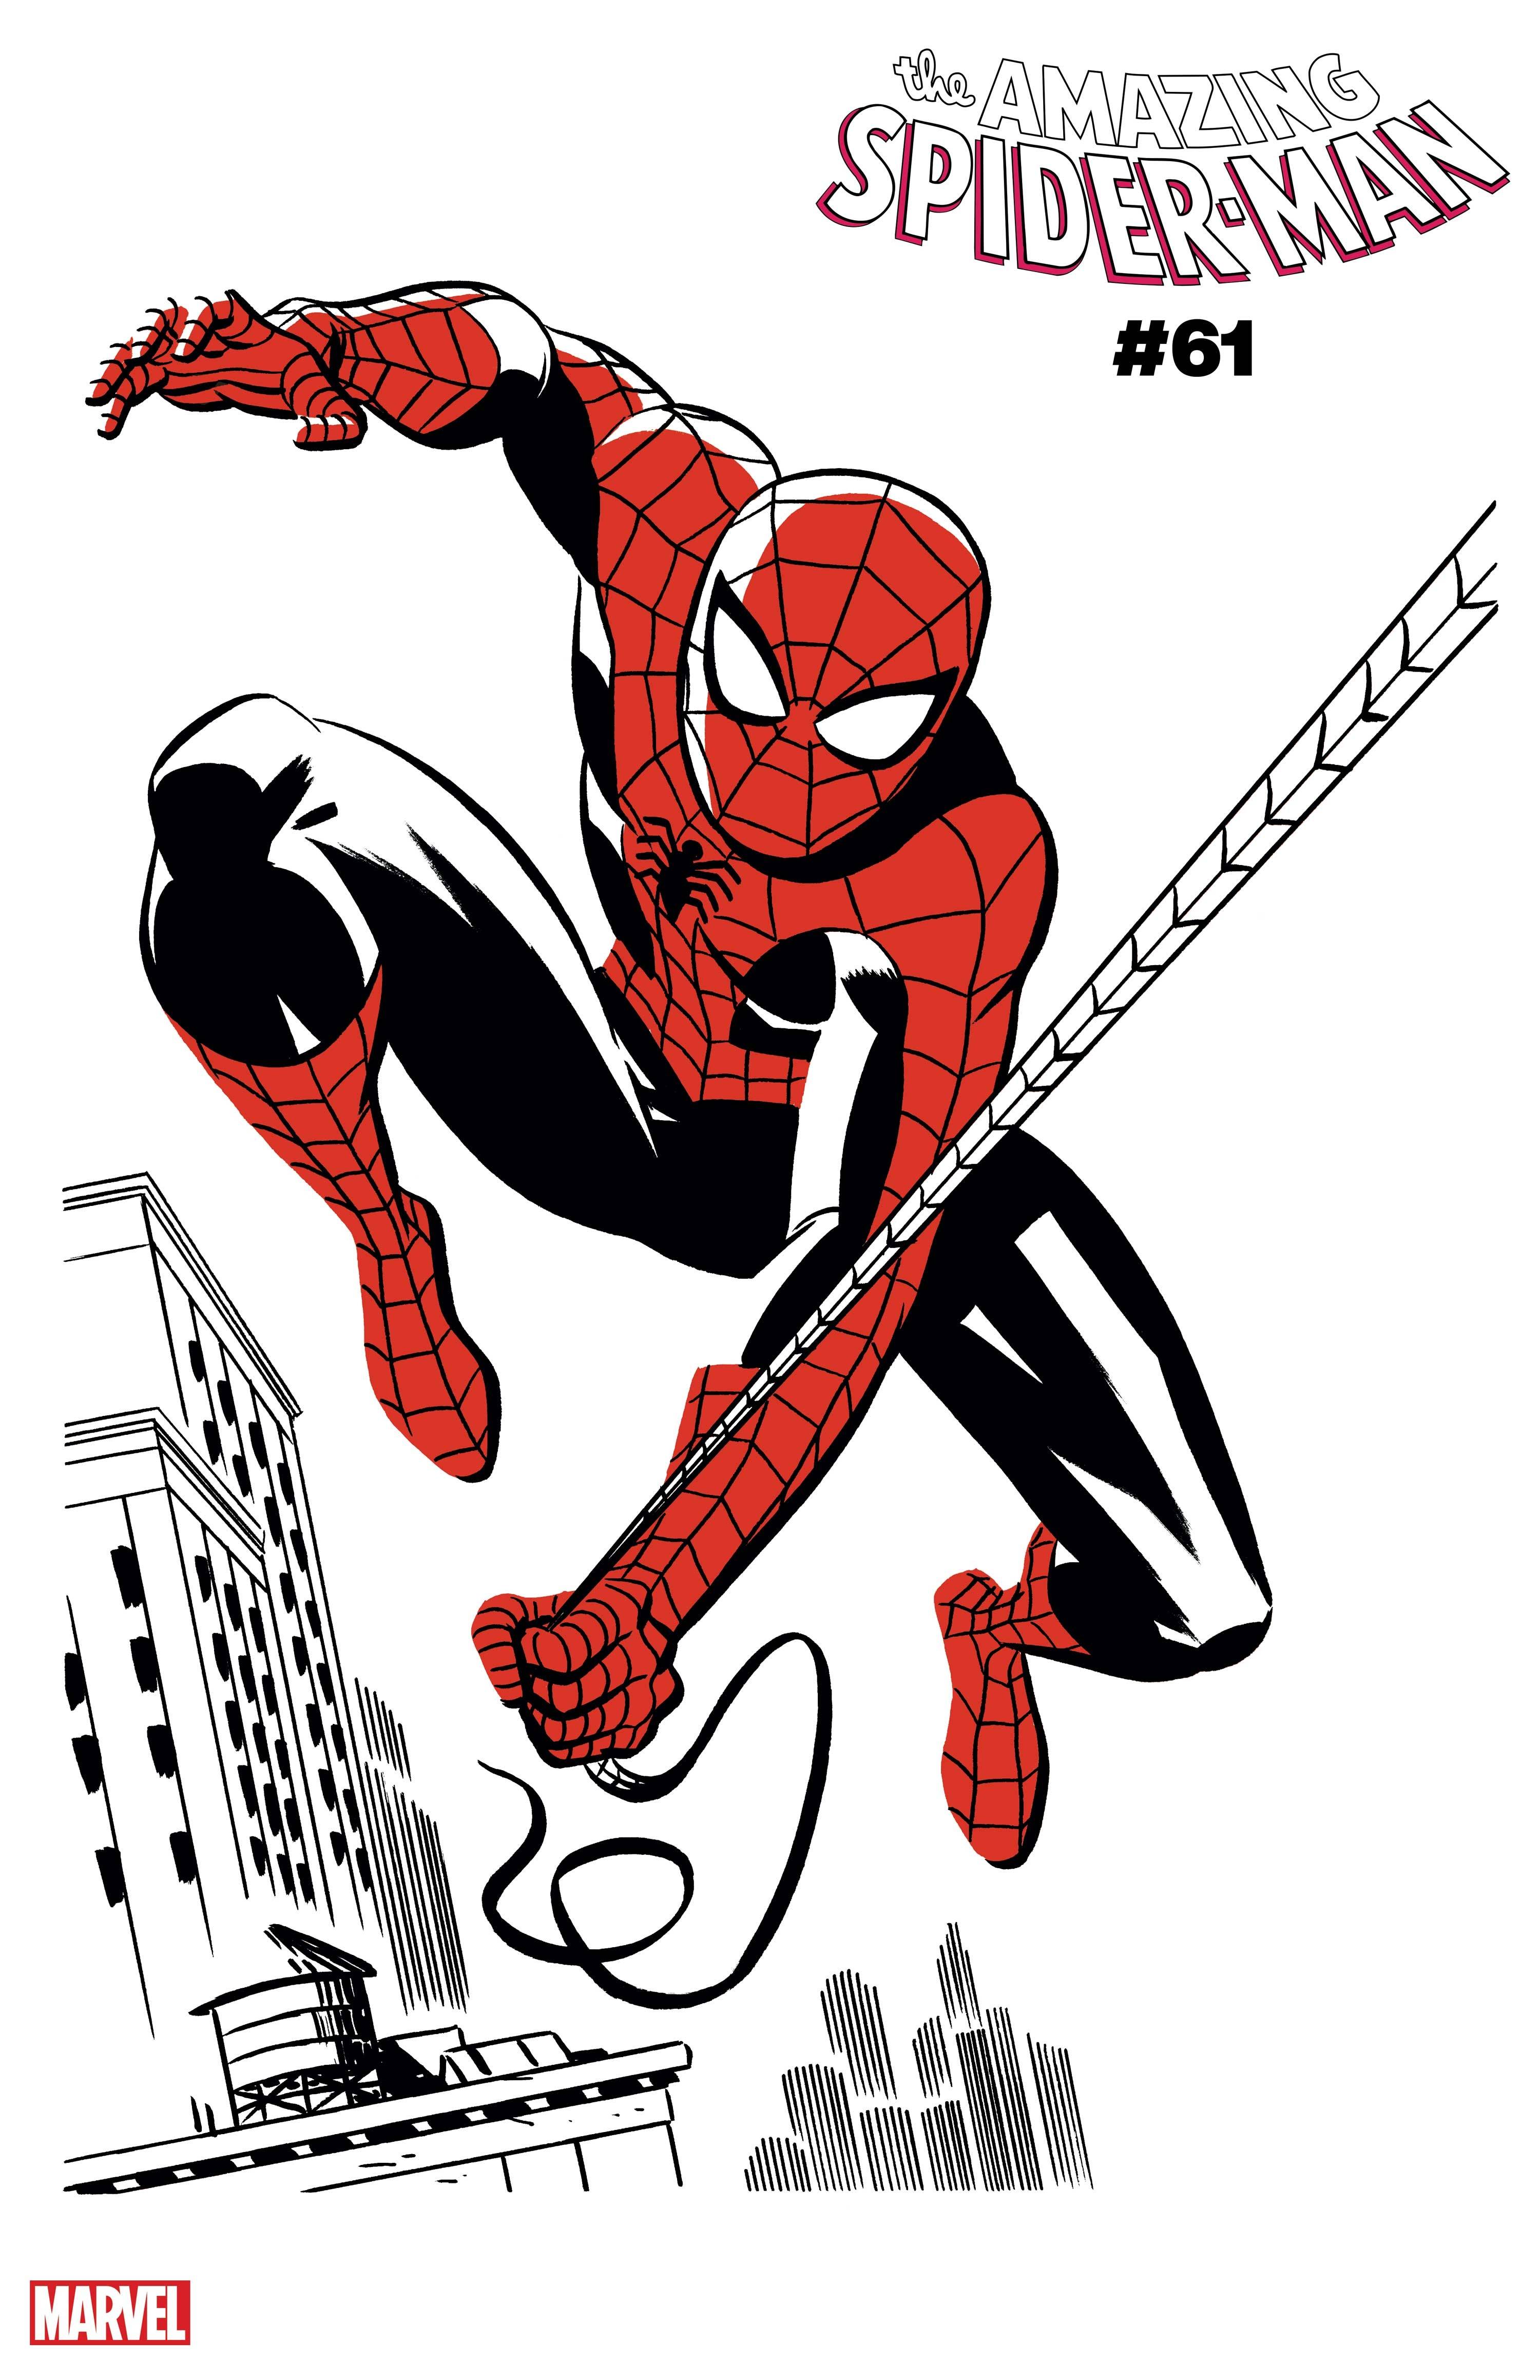 AMAZING SPIDER-MAN #61 MICHAEL CHO SPIDER-MAN TWO-TONE VAR (NEW COSTUME APPEARANCE) 03/10/21